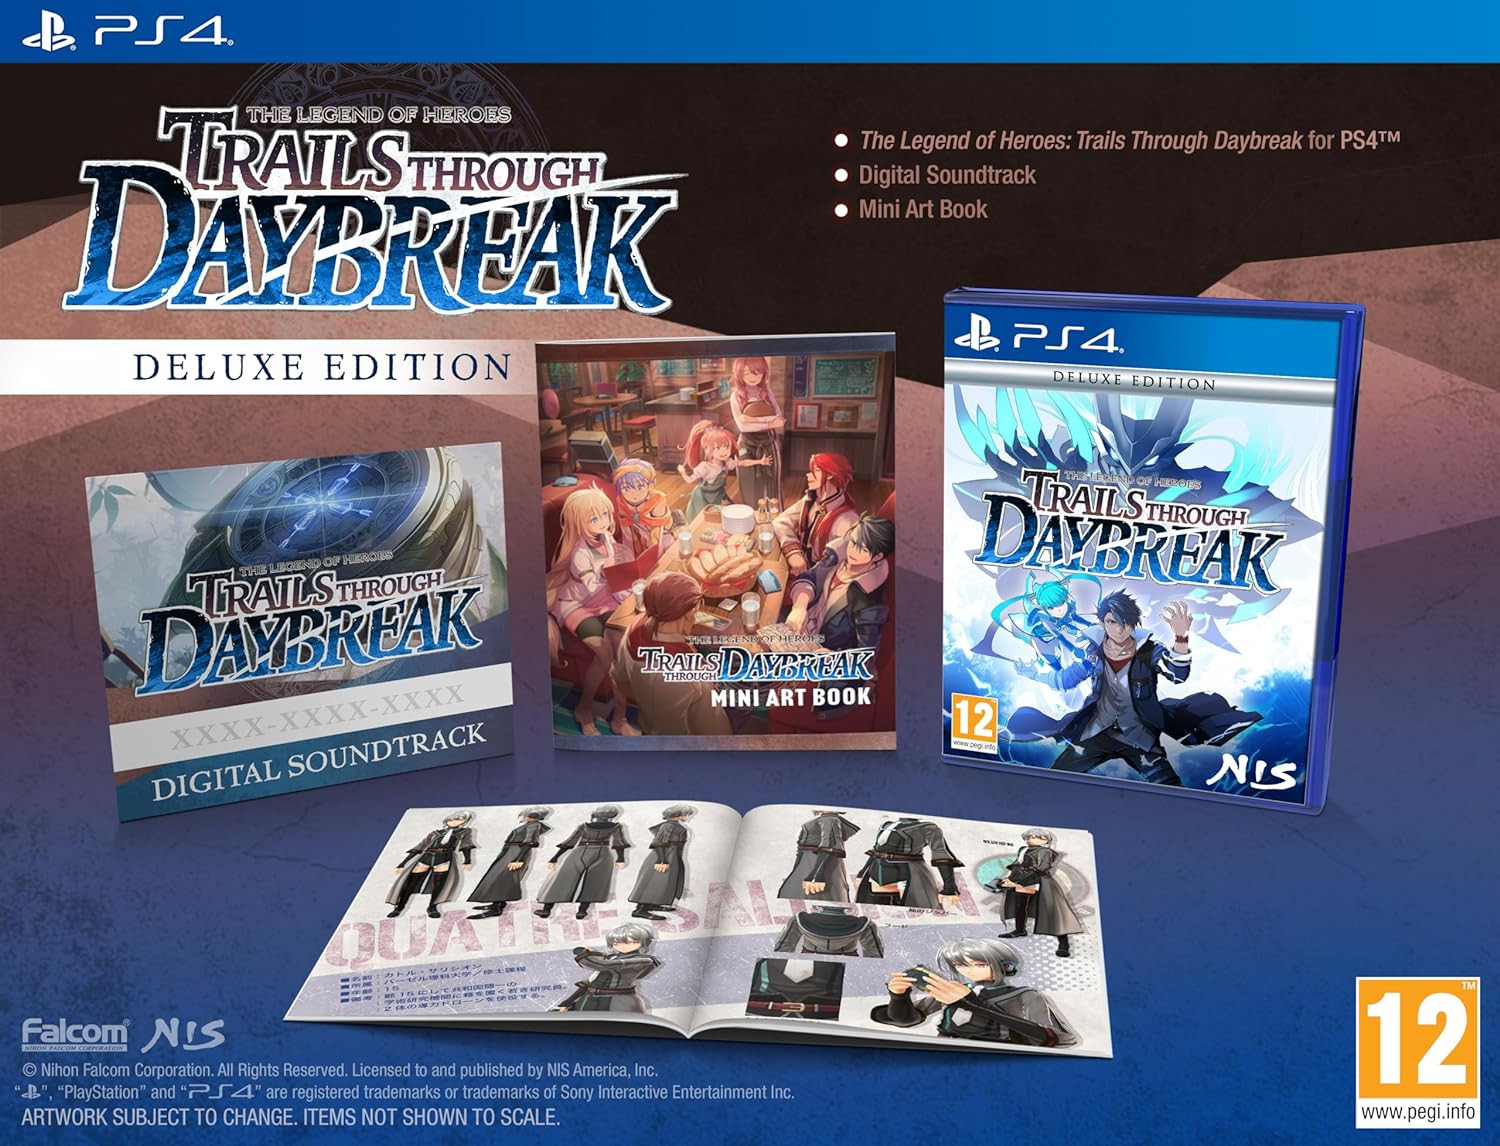 NIS The Legend of Heroes Trails Through Daybreak Deluxe Edition